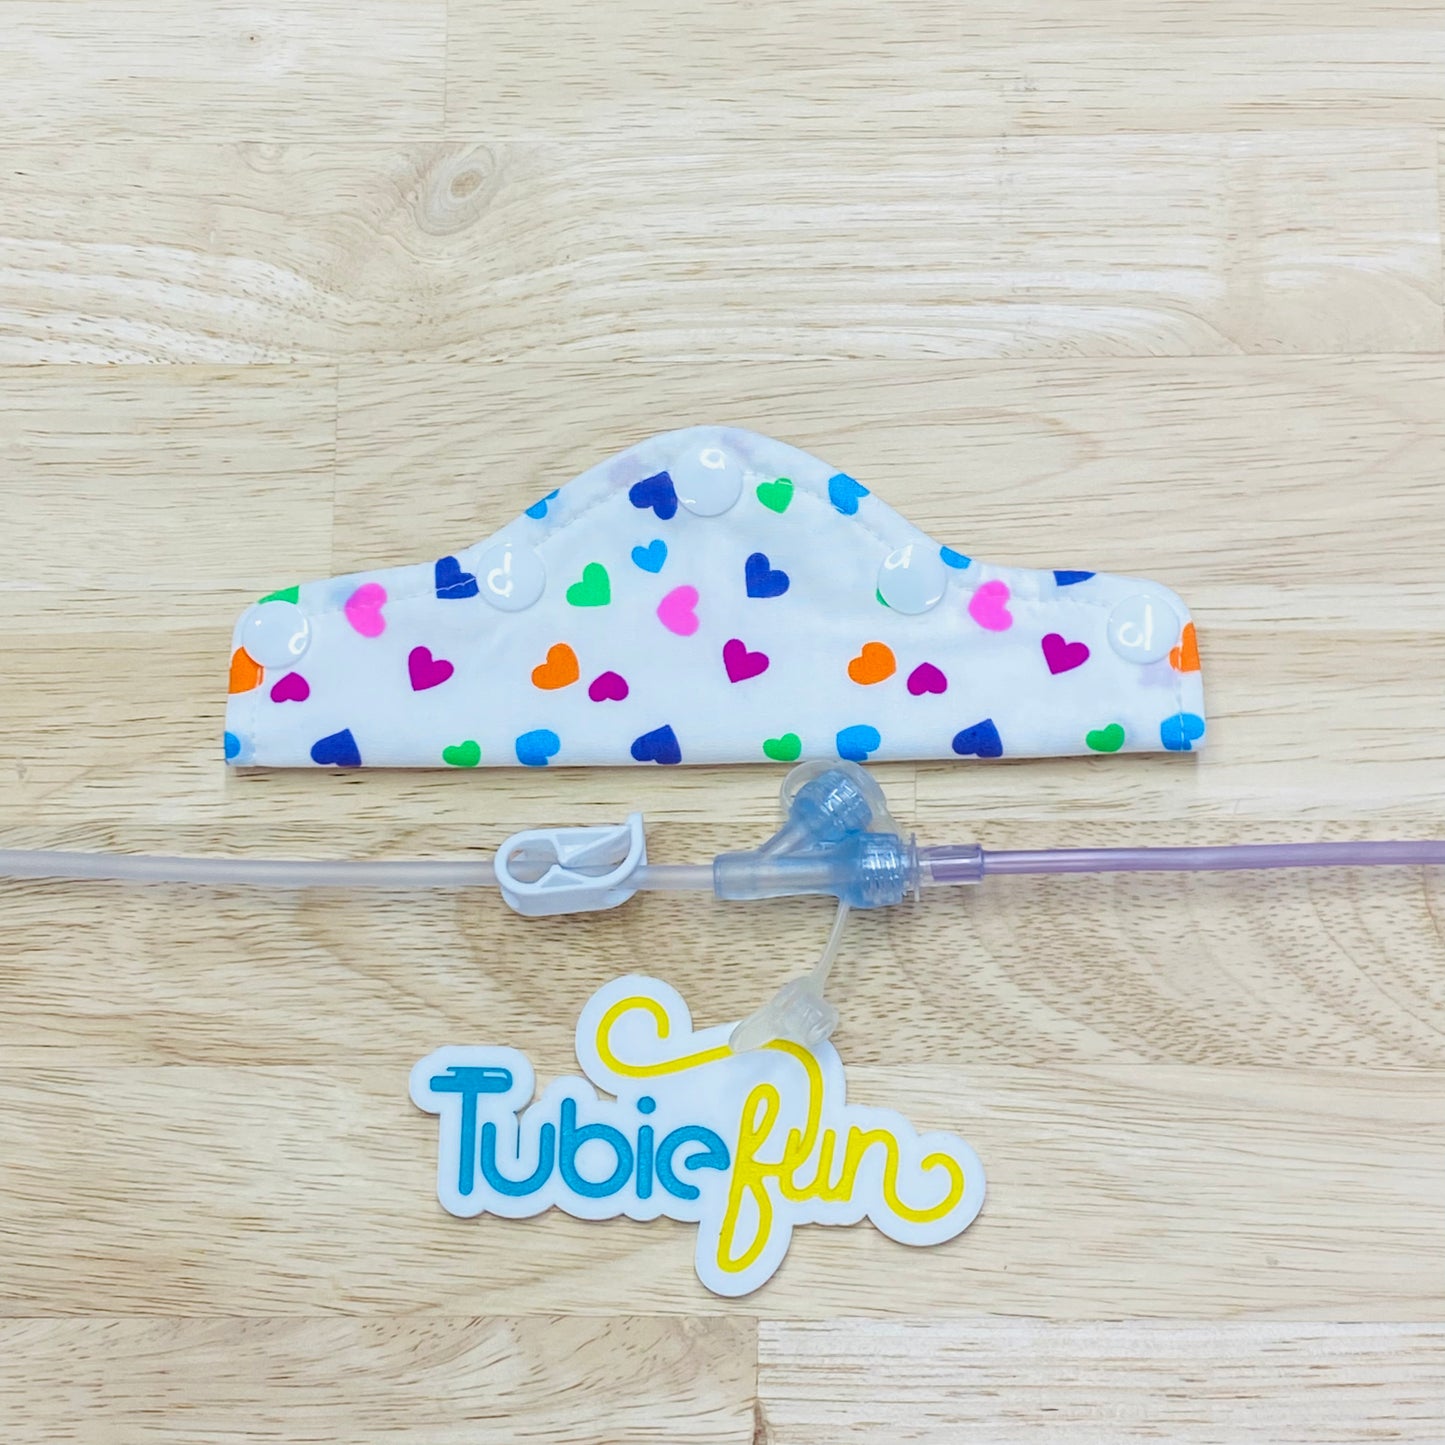 Feeding Tube Connection Cover - Coloured Hearts on White